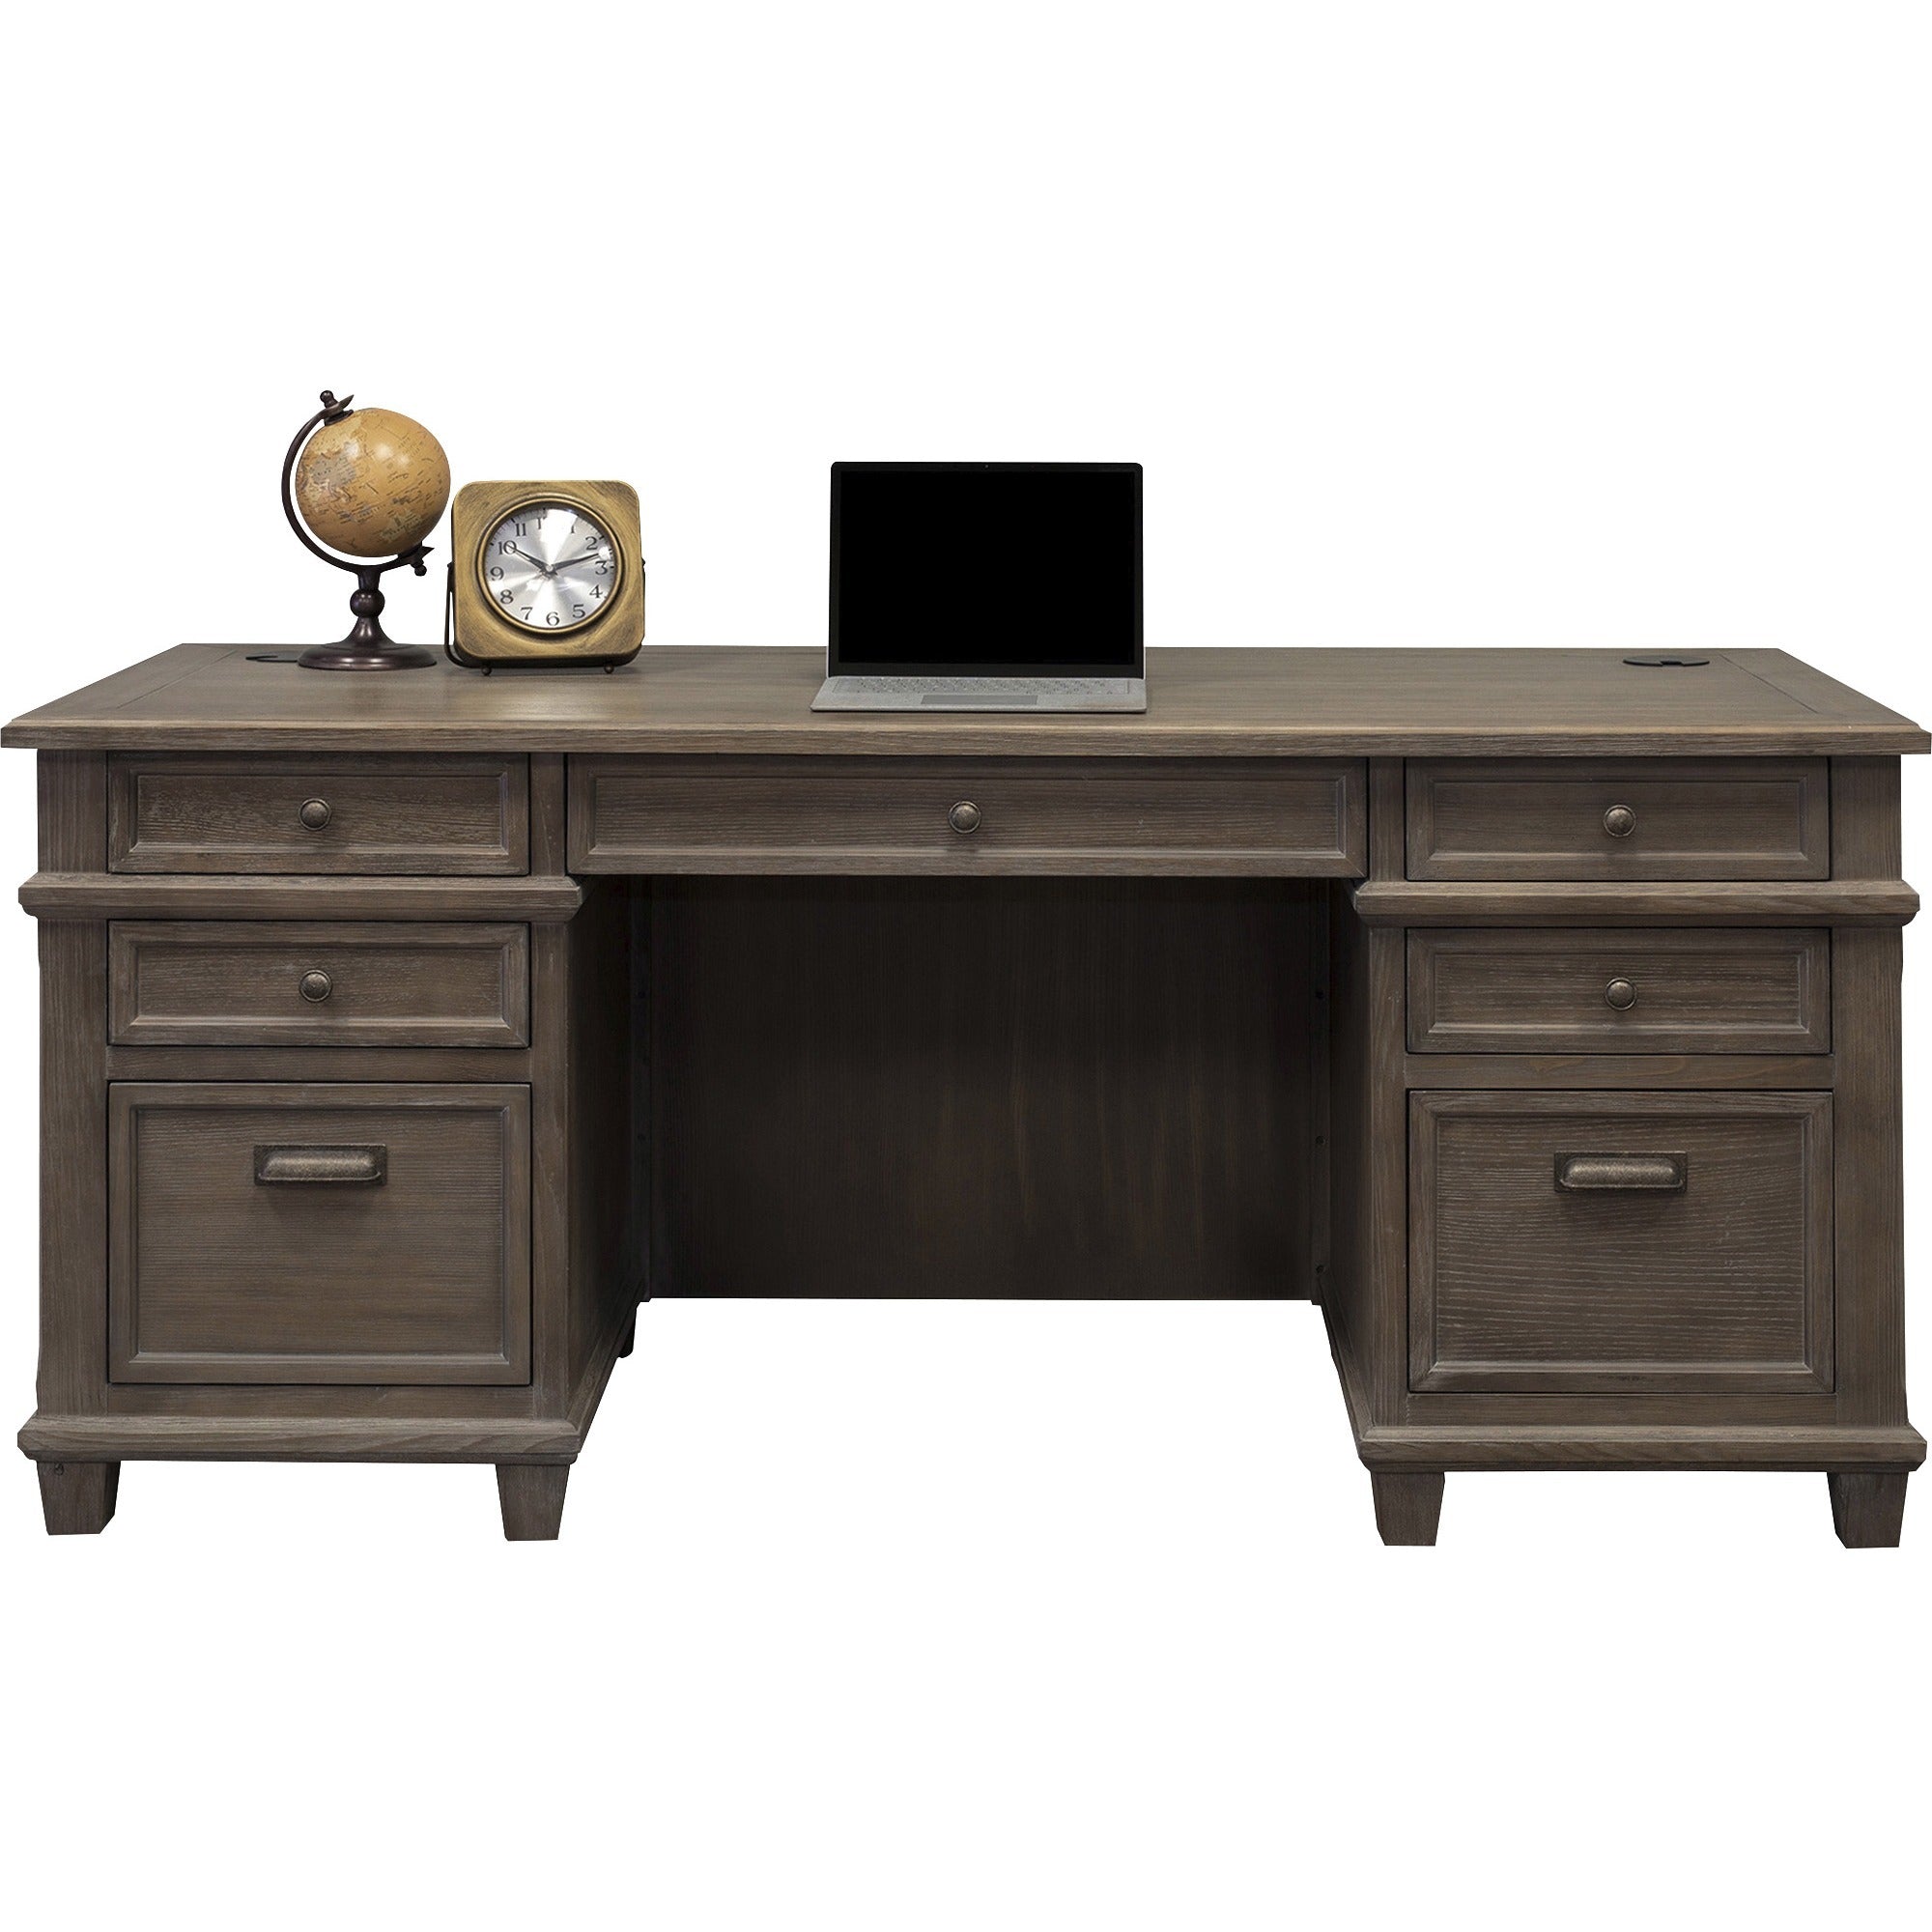 martin-carson-double-pedestal-desk-7-drawer-7-x-storage-utility-file-drawers-double-pedestal-material-veneer-solid-lumber-finish-weathered-dove_mrtimca680 - 2